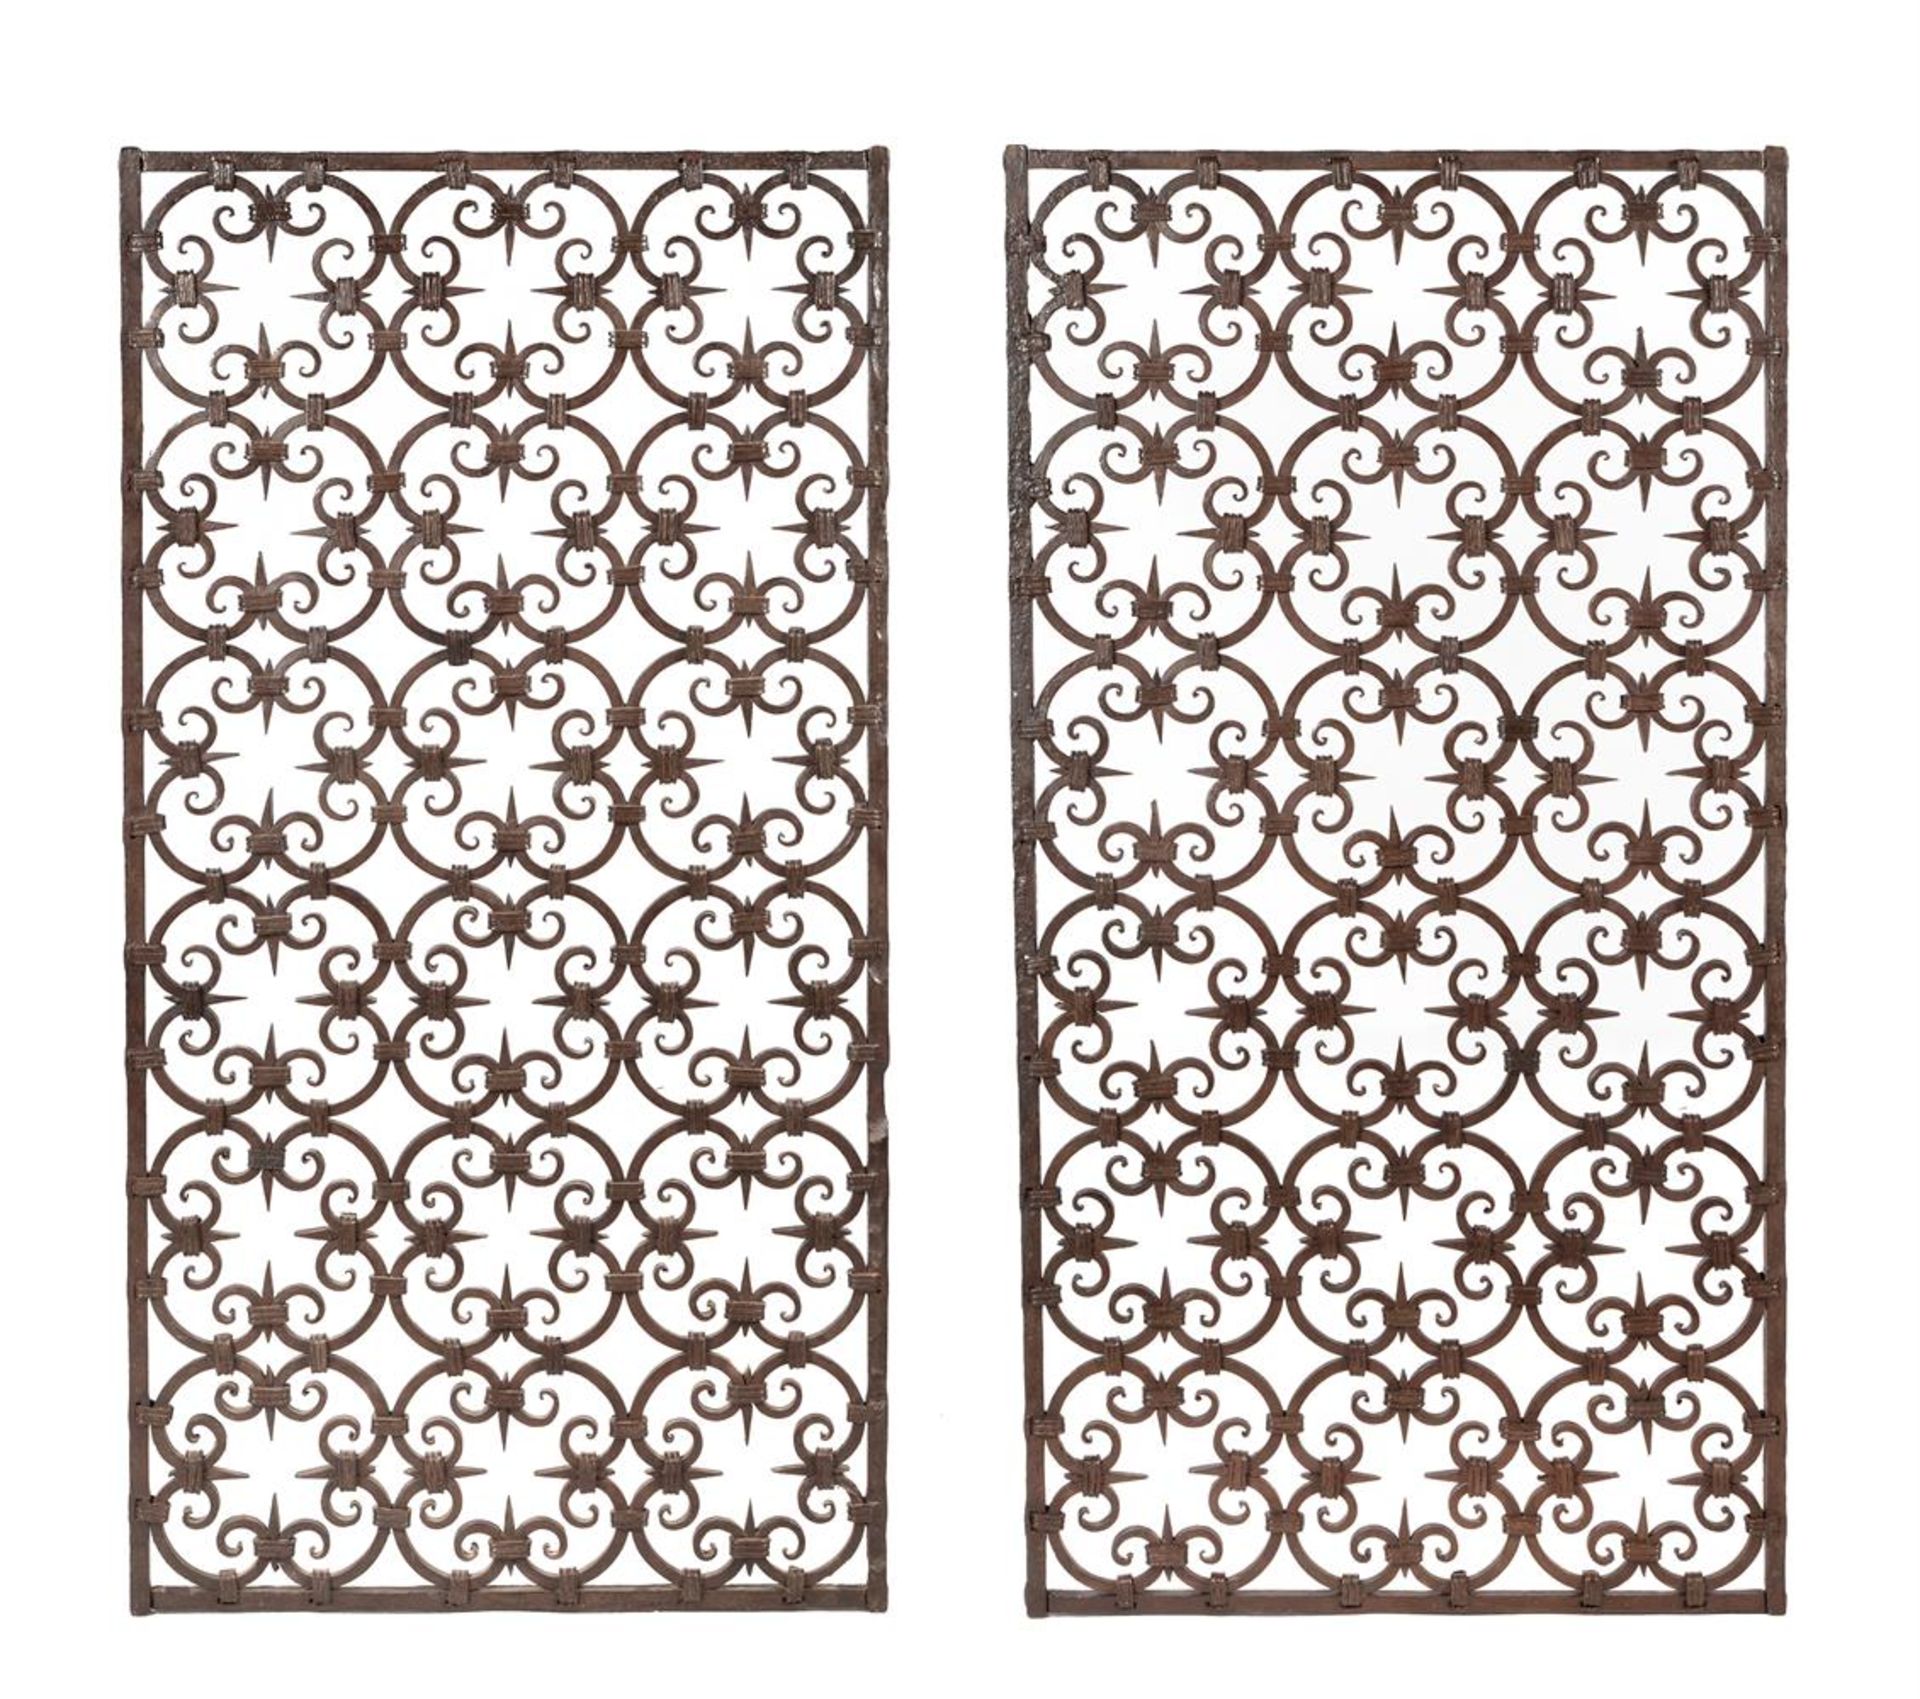 A pair of wrought Iron panels